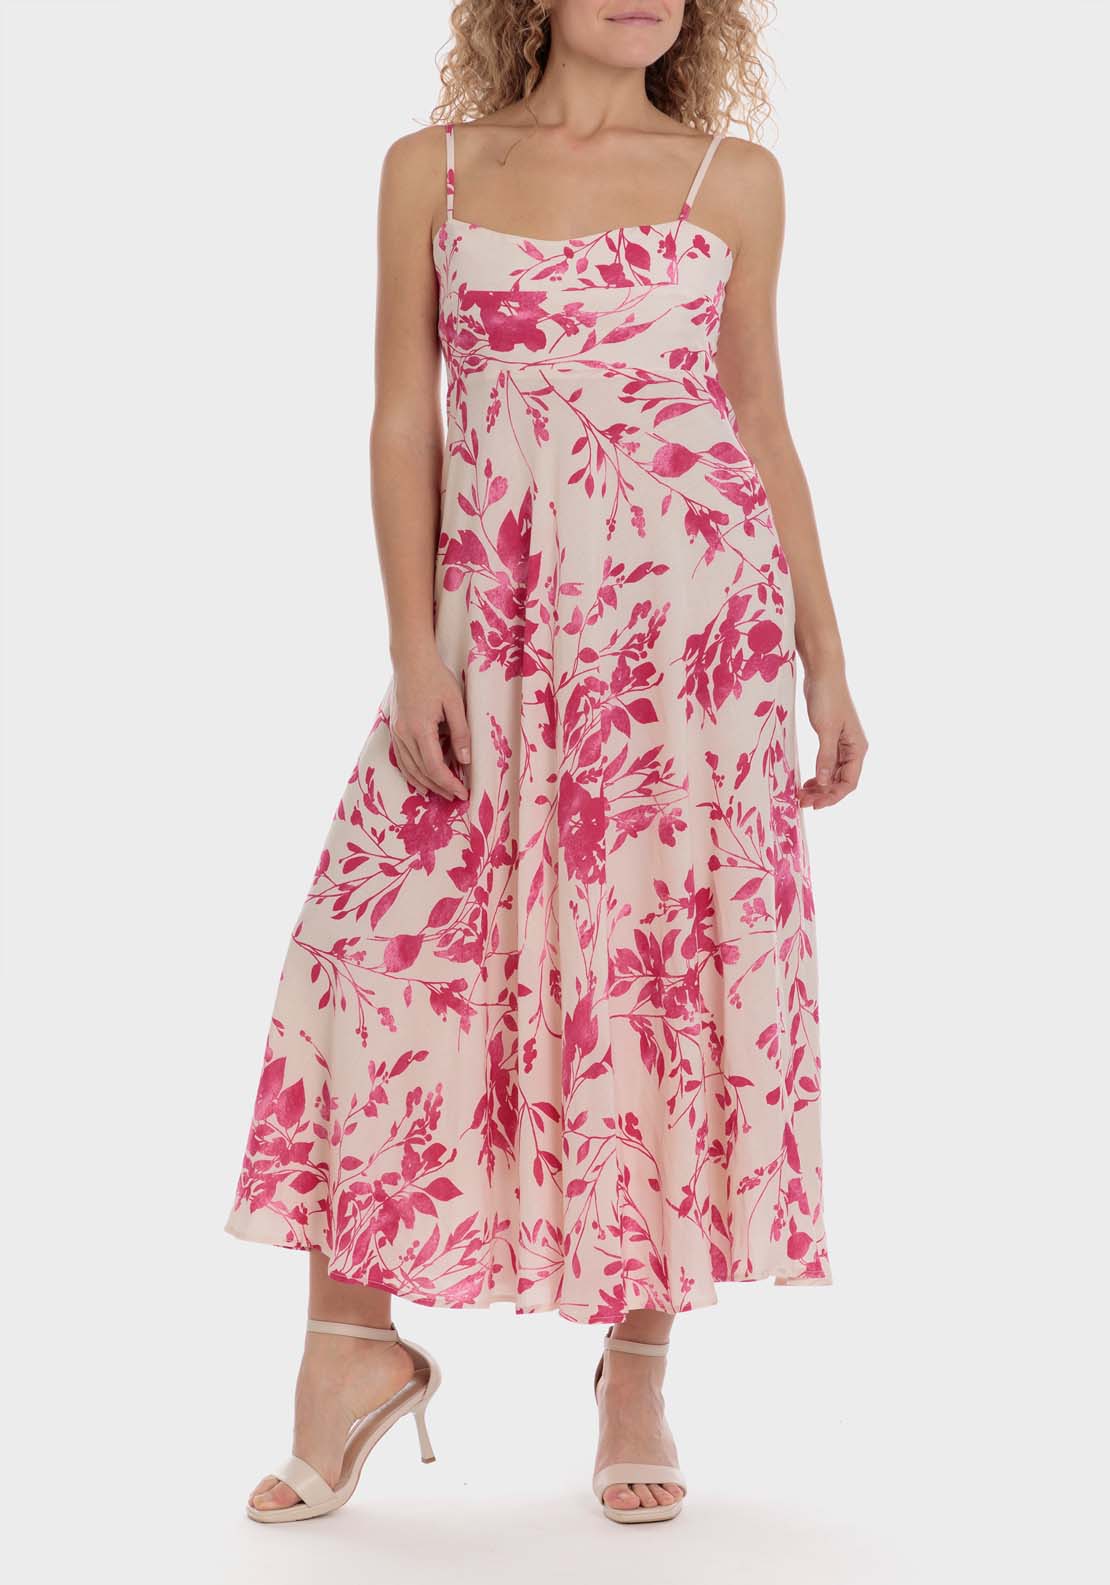 Punt Roma Printed Linen Dress 2 Shaws Department Stores